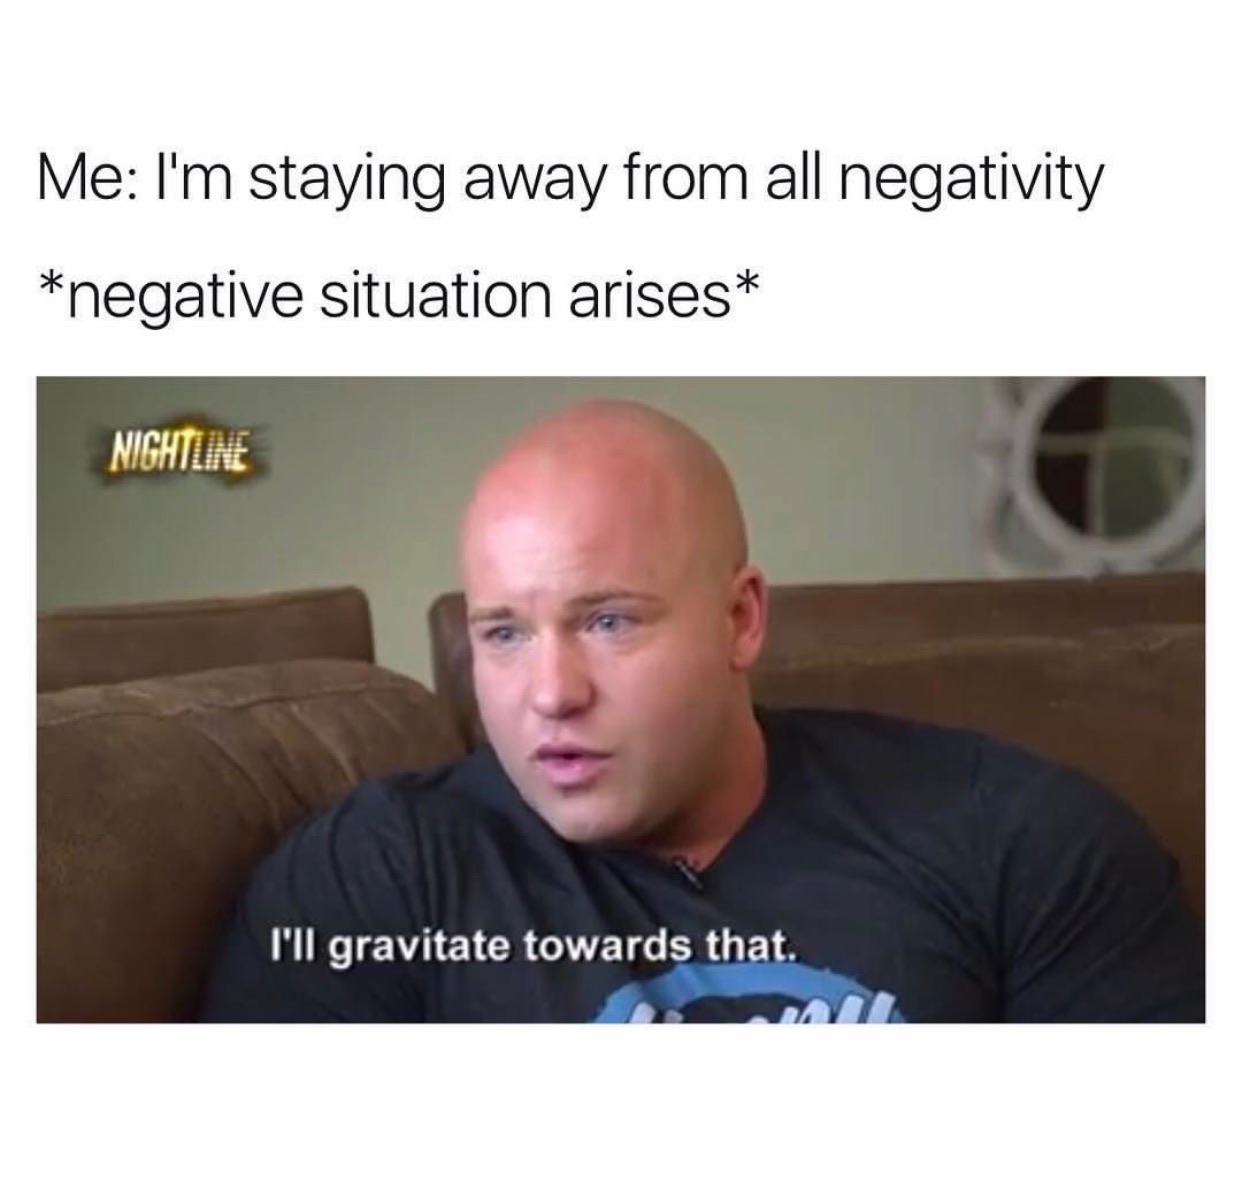 need food memes - Me I'm staying away from all negativity negative situation arises Nightline I'll gravitate towards that.